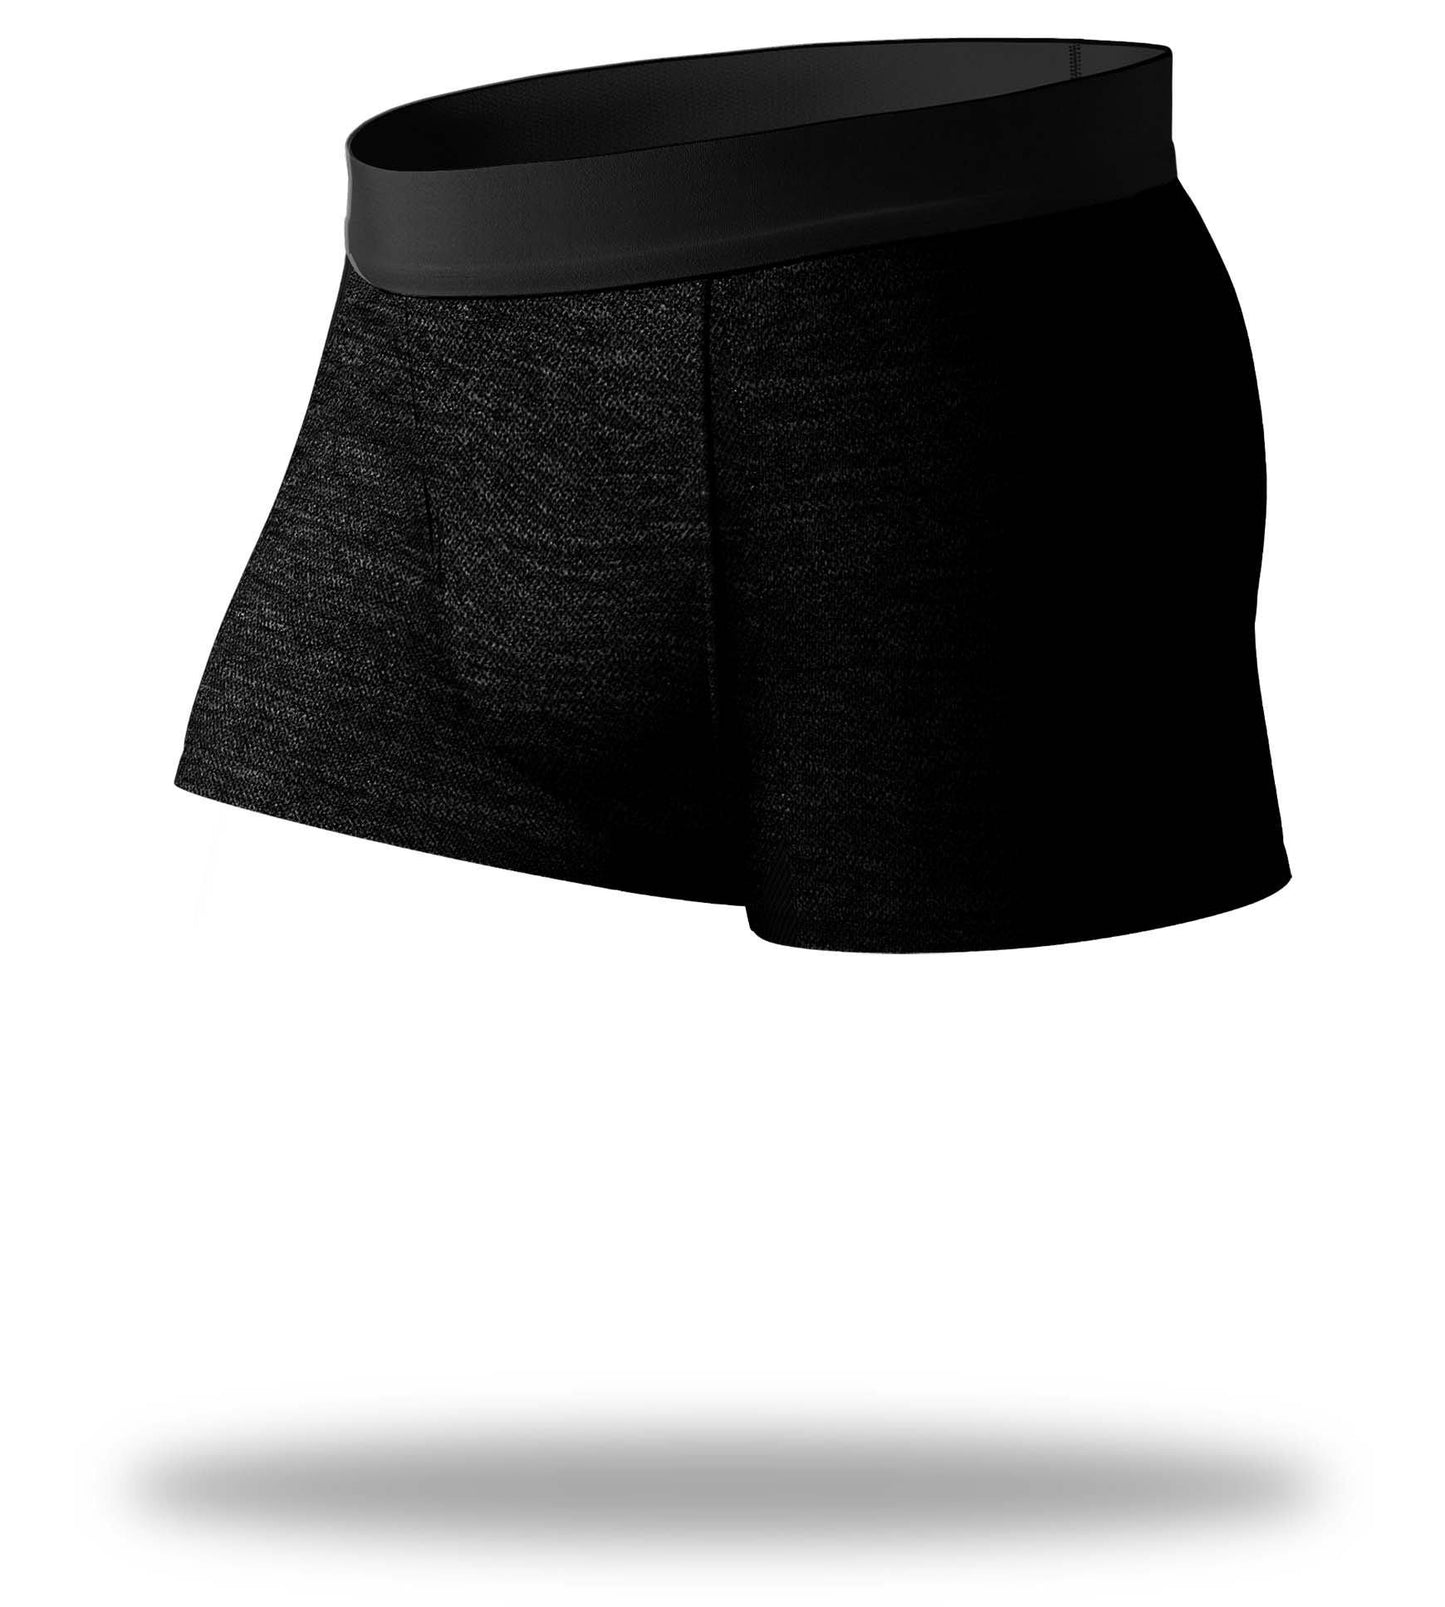 The Solid Gold Charcoal SuperFit Trunk